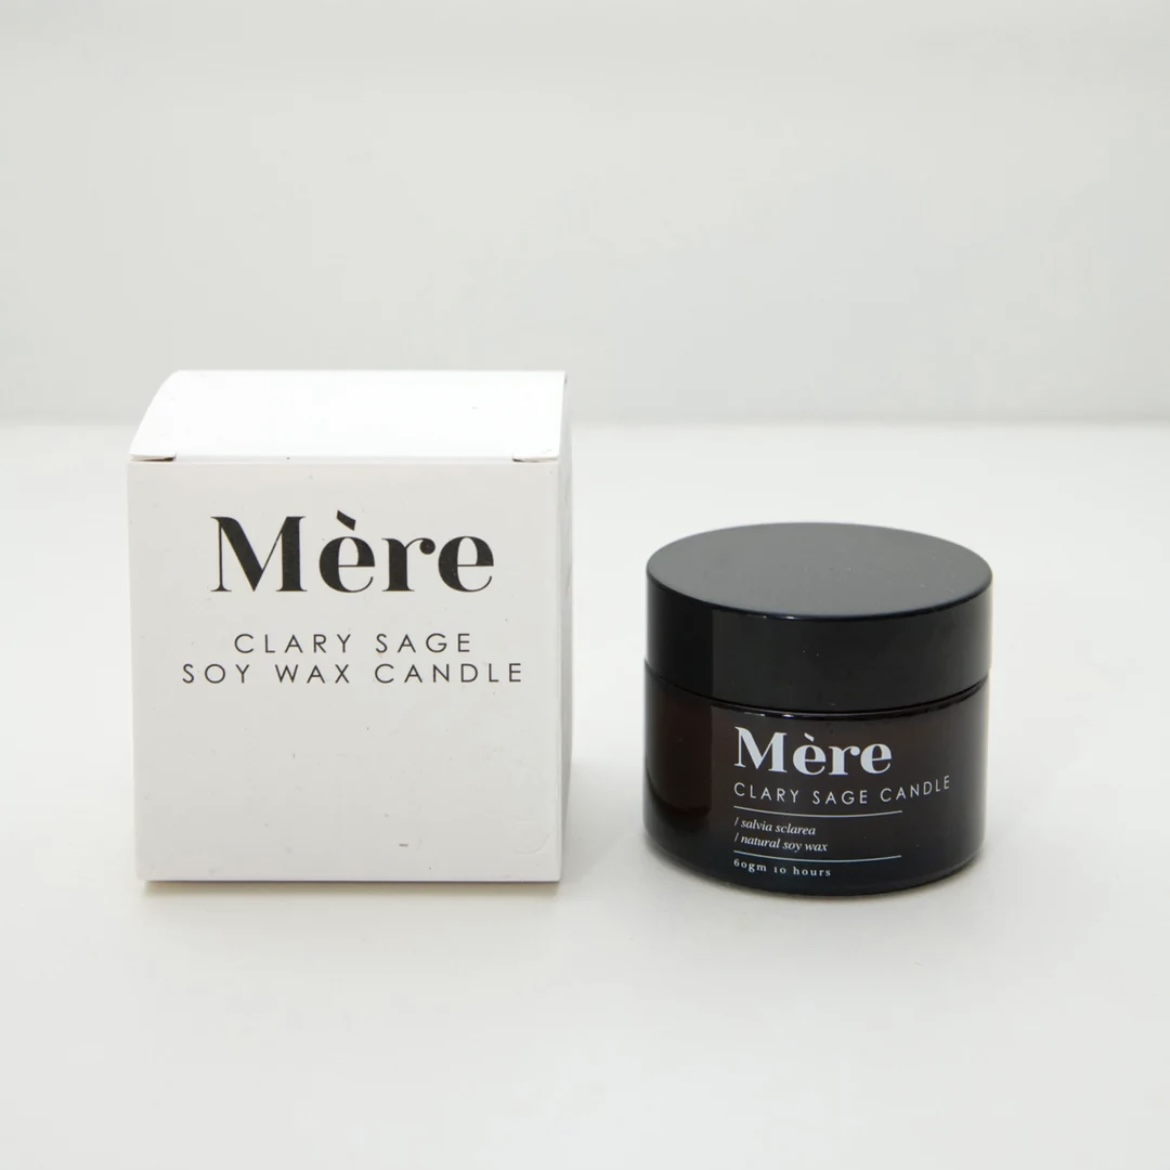 Mere Clary Sage Candle